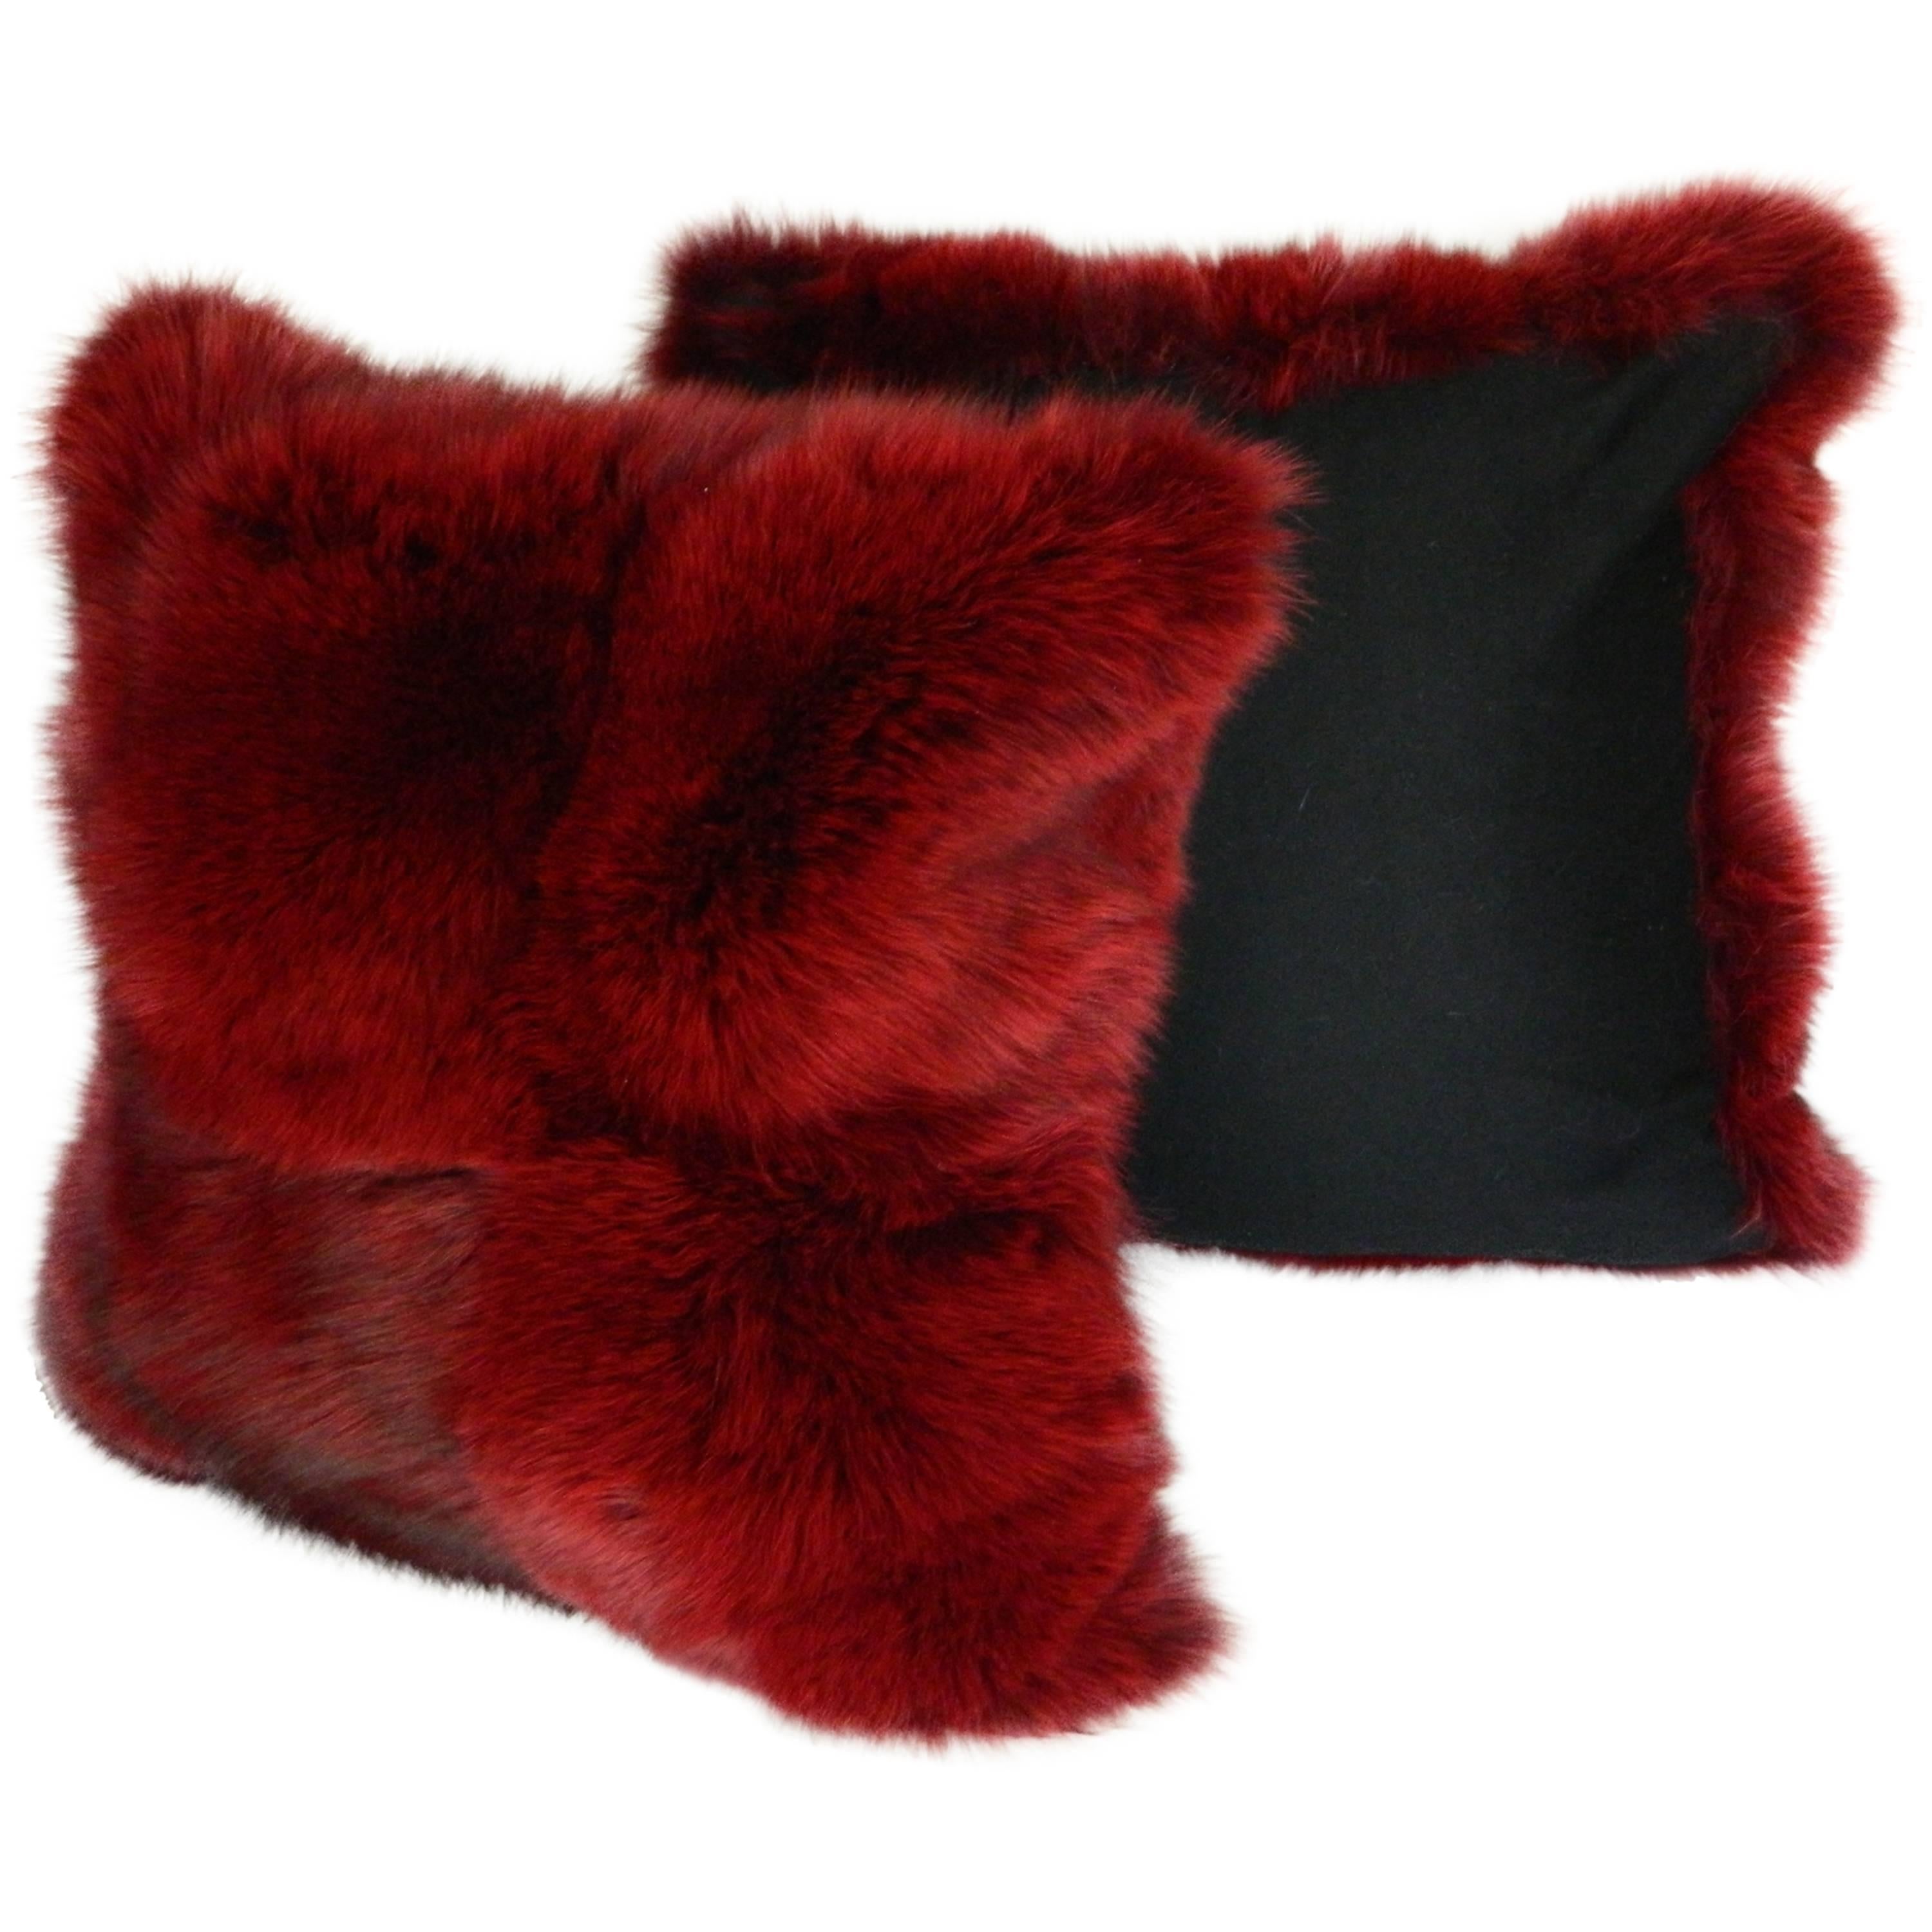 Pair of Beautiful Burgundy Fox Pillows For Sale